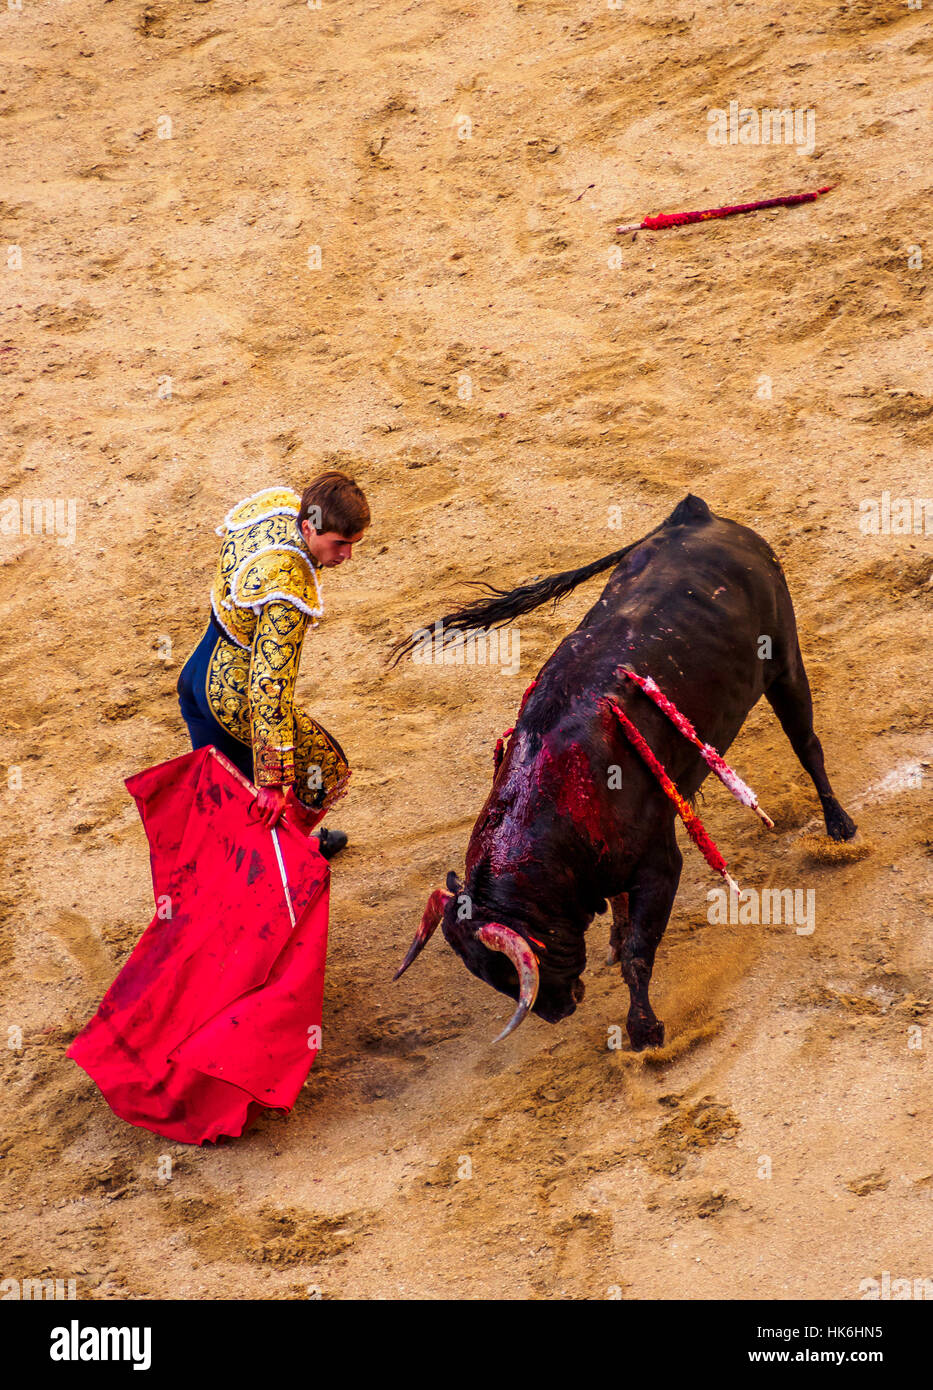 Bullfighter Teases Young Bull With Red Cape Bull With Two Spears In Back Muleta Bullfighting Arena Torero Matador Novice Stock Photo Alamy